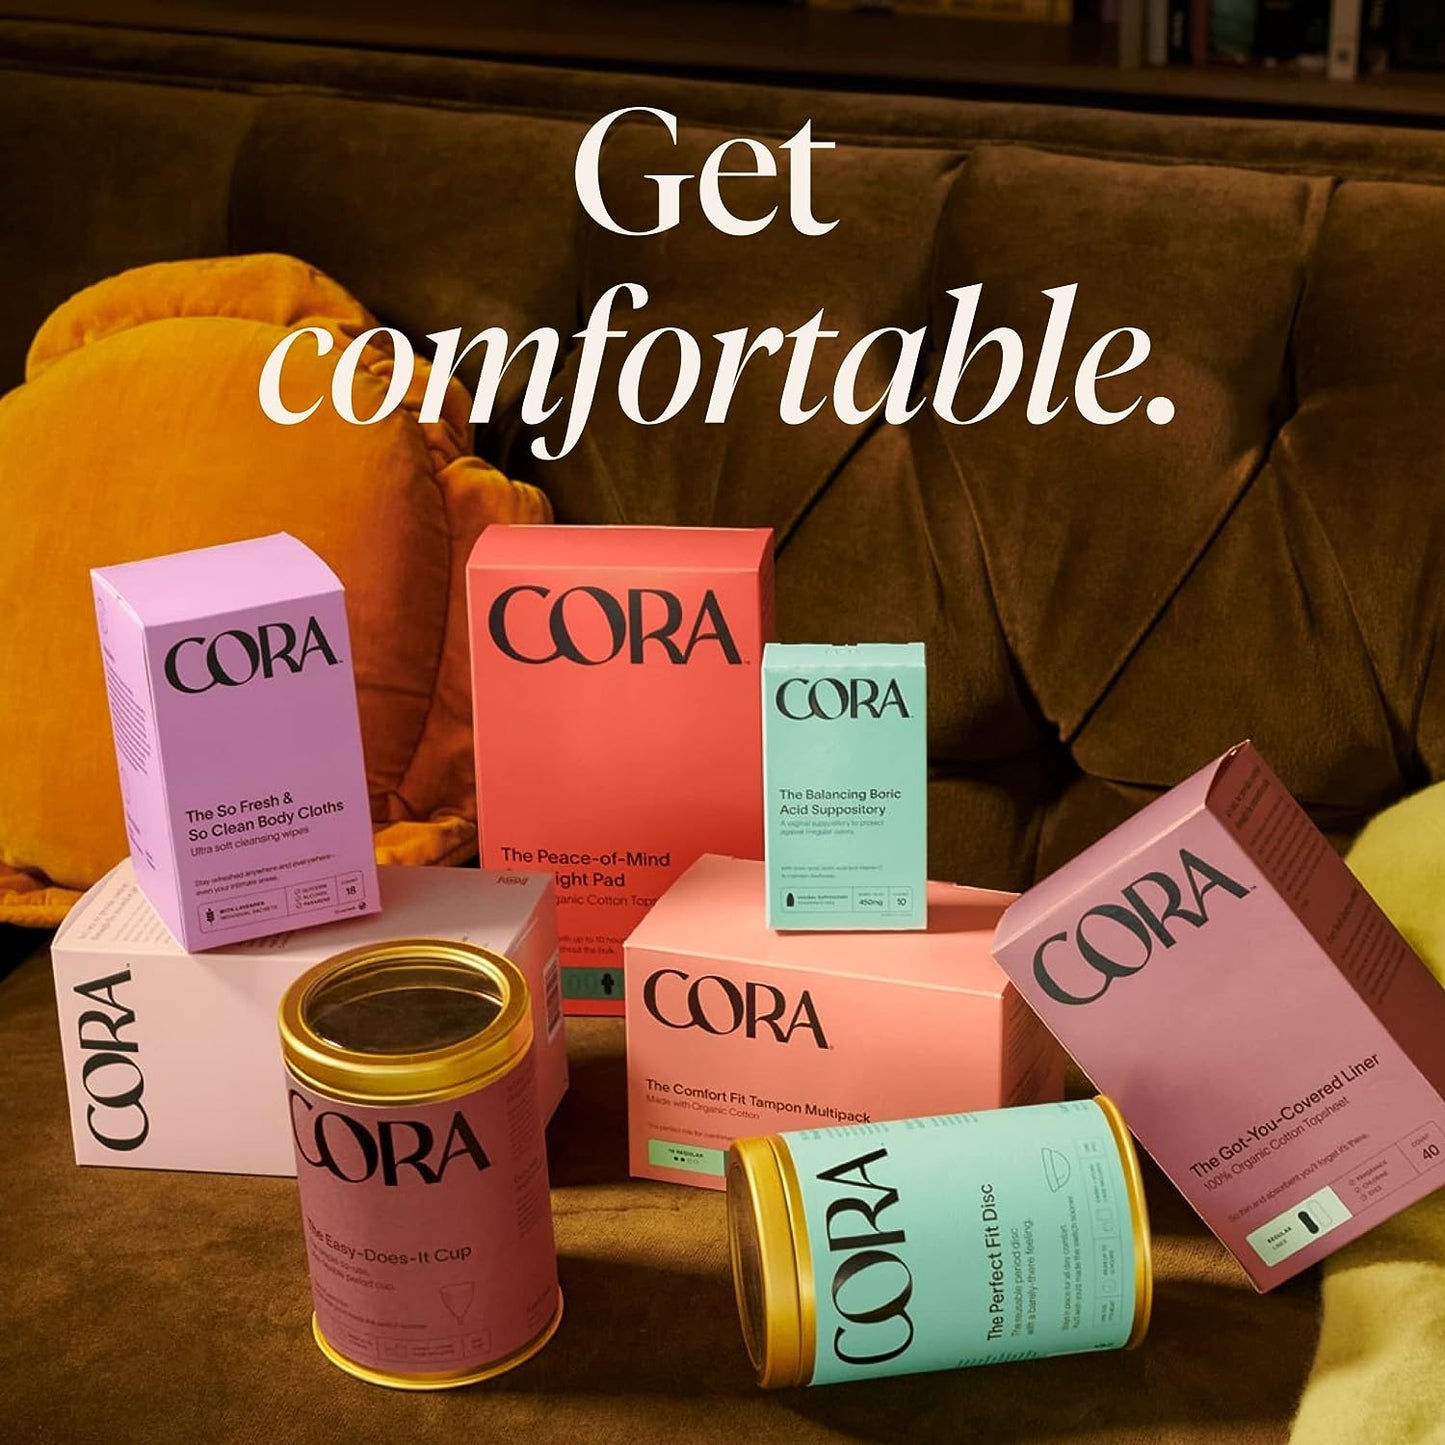 Cora 100% Organic Cotton Non-Applicator Tampons | Ultra-Absorbent, Unscented, Natural, Non-Toxic, Applicator Free | Eco-Conscious (36 S/S+ Tampons) - Premium Tampons from Concordia Style Boutique - Just $21.17! Shop now at Concordia Style Boutique